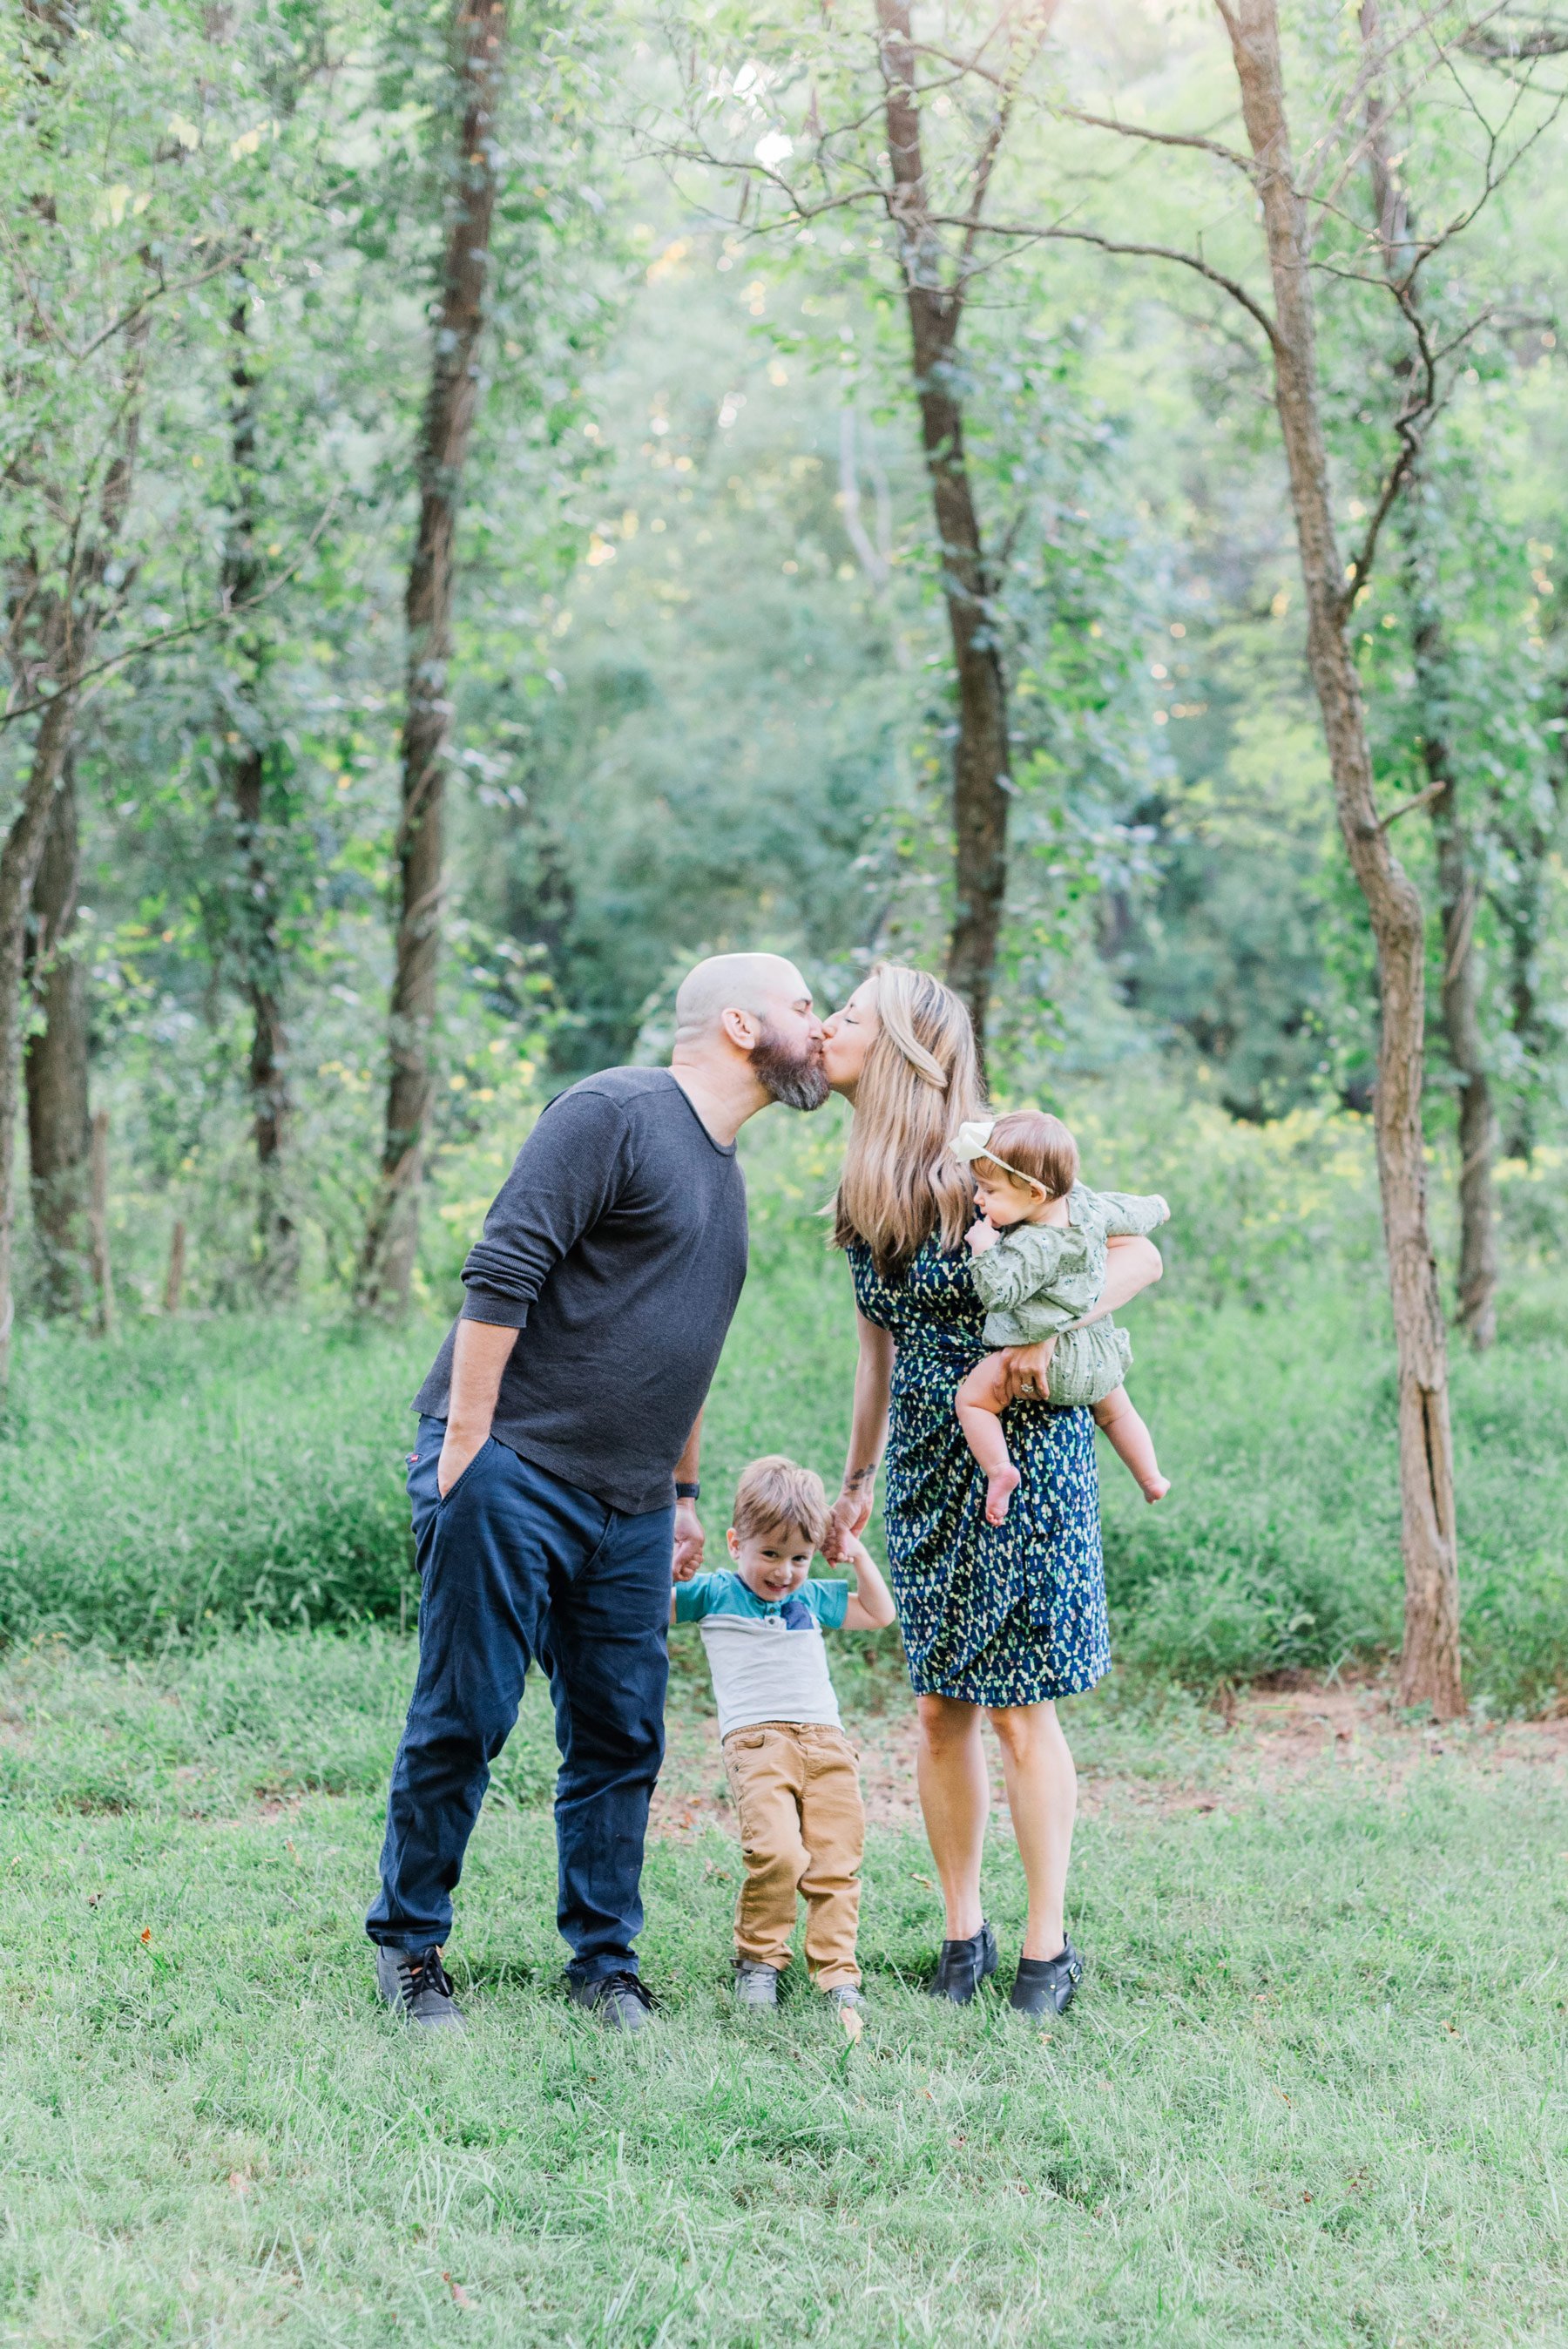    I love the wispy trees behind this sweet family of four as mom and dad share a kiss. #peachtreecityphotographer #familyphotographersenoia #outdoorfamilyphotos #familyphotoswithkids #fayettevillefamilyphotographer #fallfamilyphotographer #georgiafa